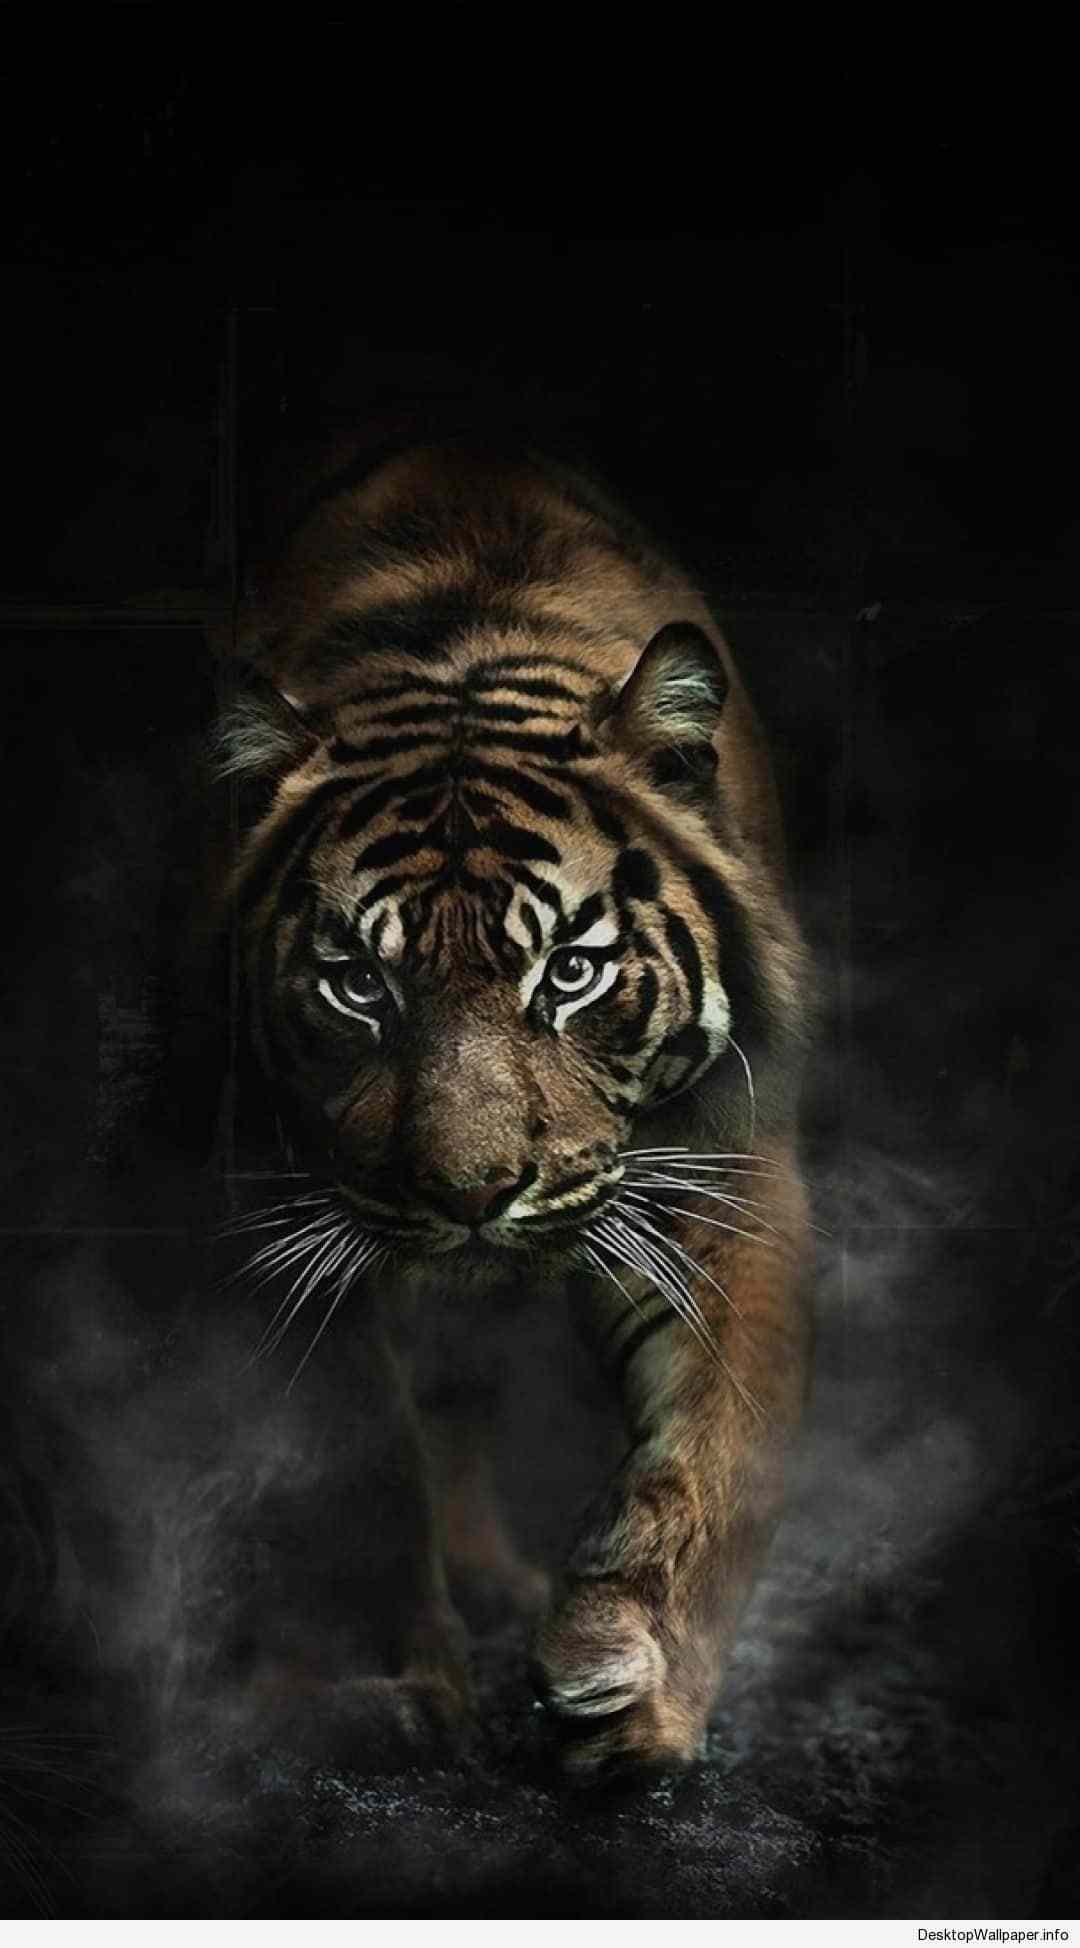 Tiger iPhone 5 Wallpaper Free Tiger iPhone 5 Background